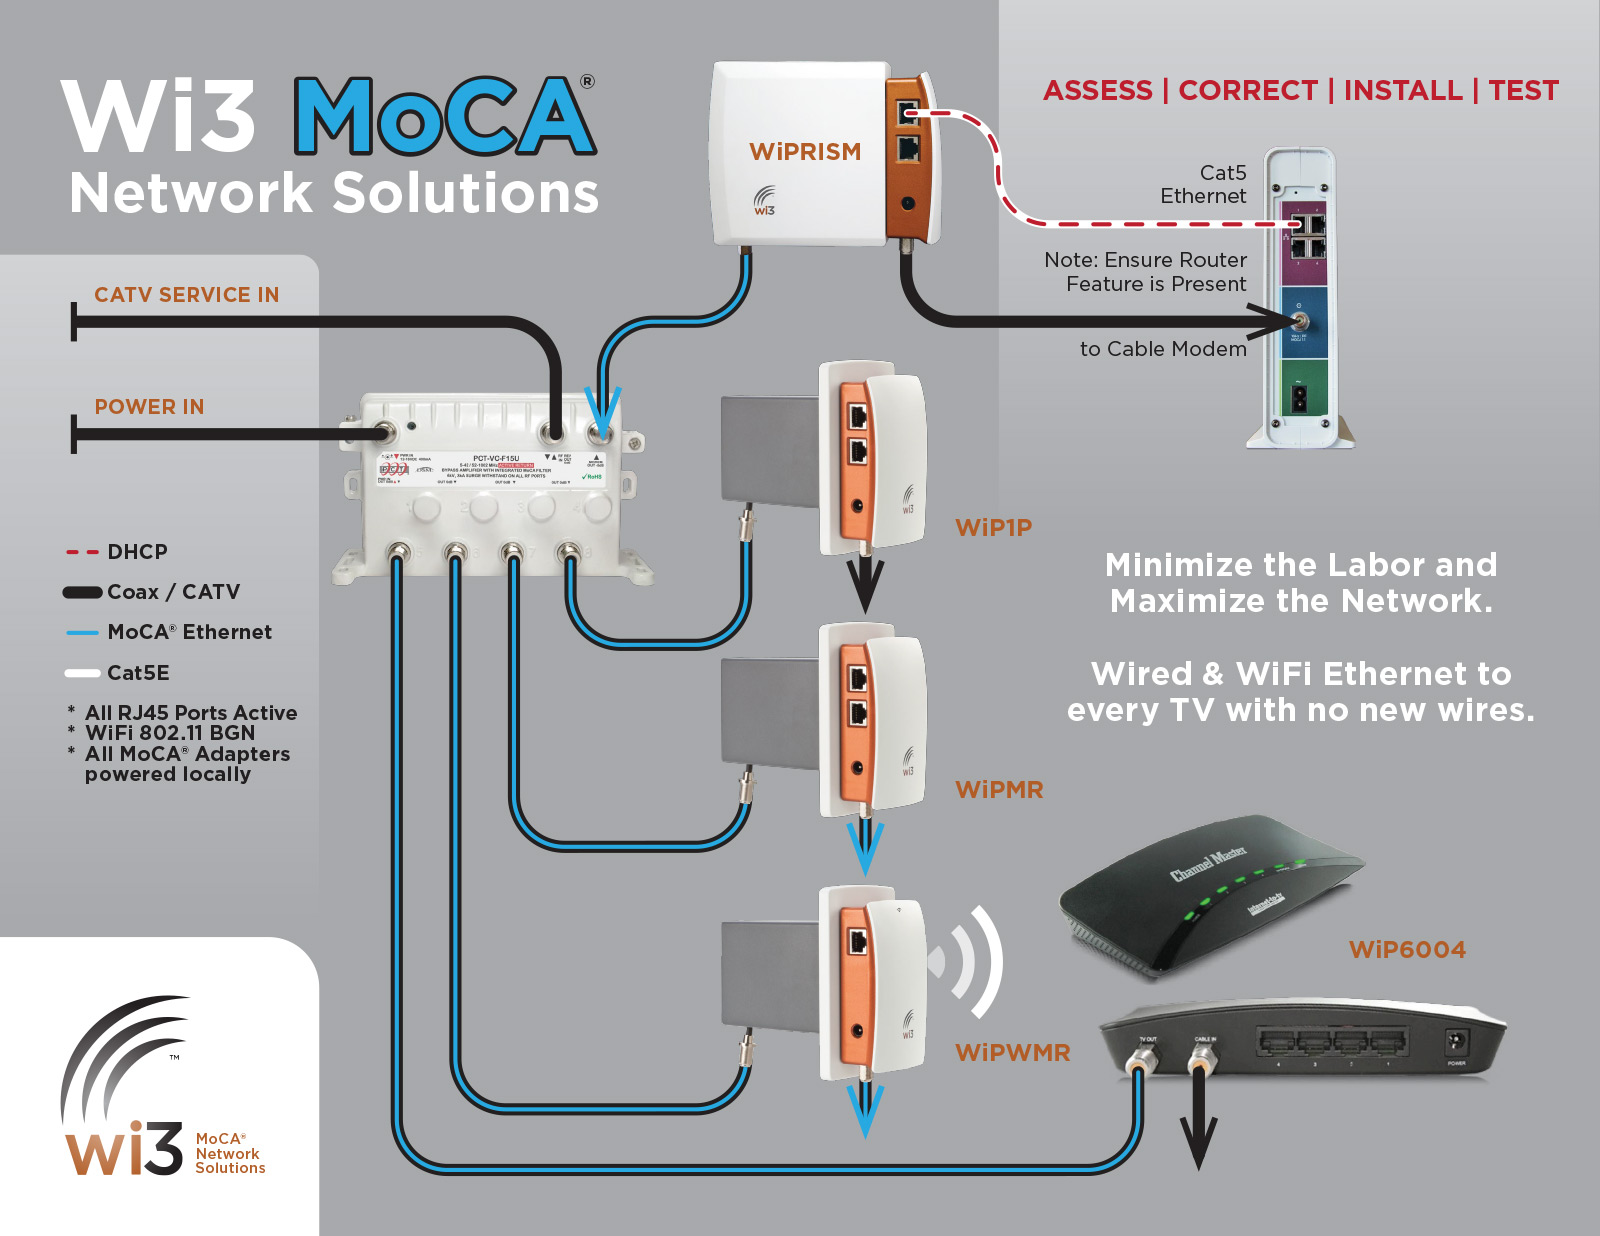 Wi3 MoCA® Network Solutions Joins Home Technology Specialists of ...